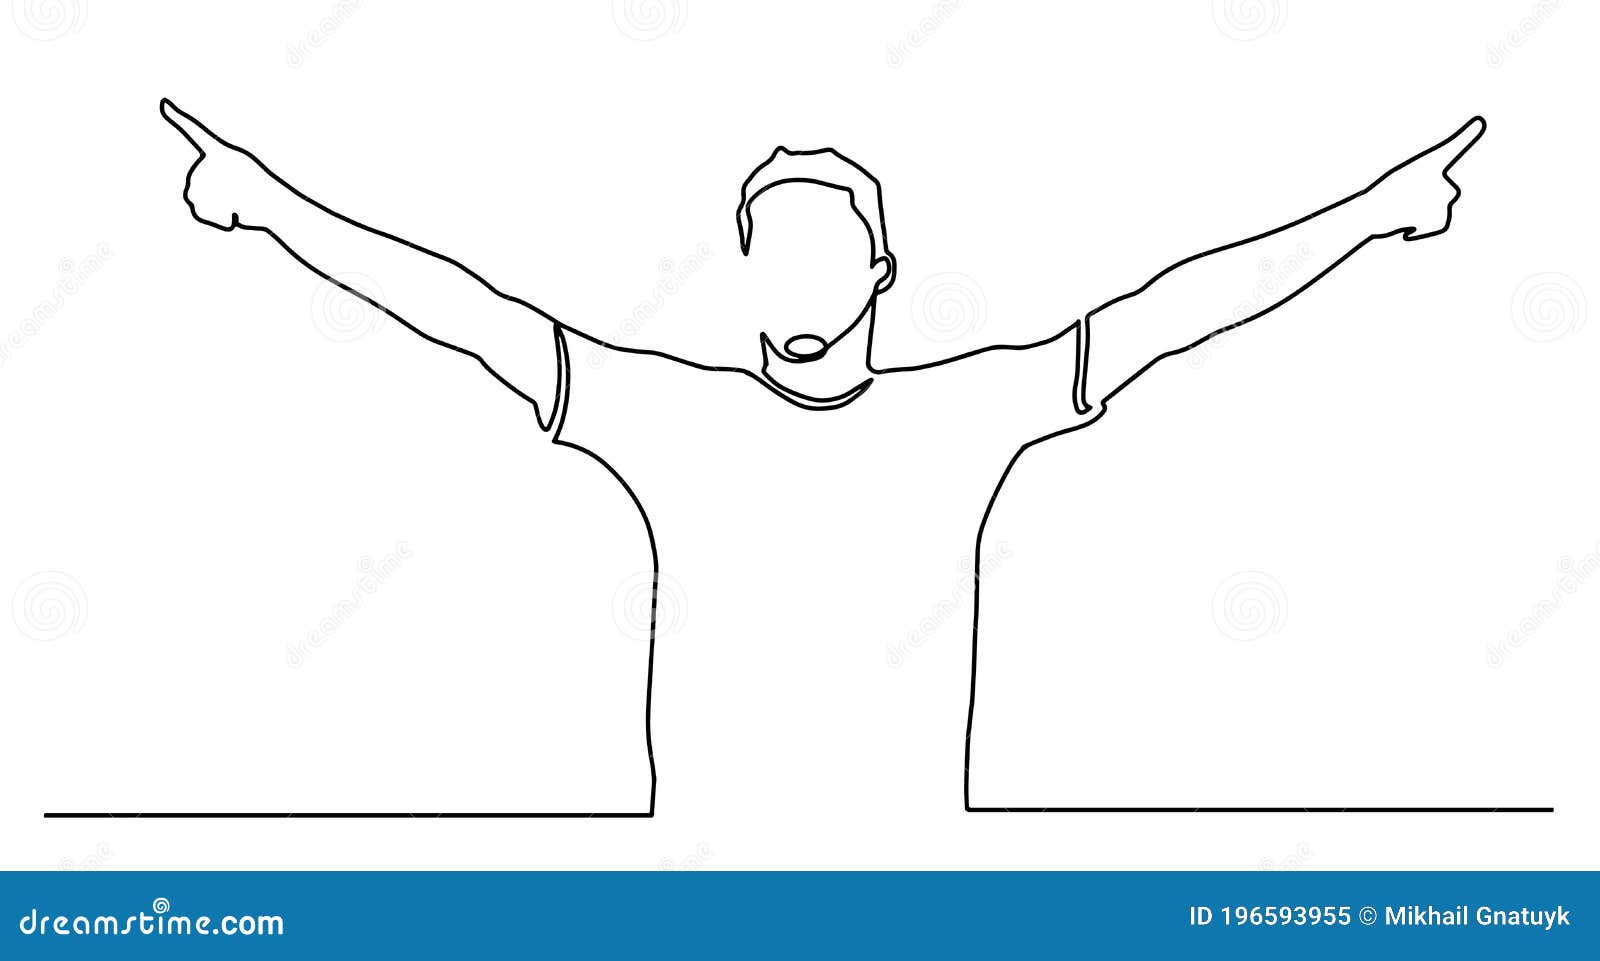 Continuous Line Drawing Of Cheering Man Holding Fists Man Silhouette Excited Hold Hands Up Raised Arms Full Length Concept Stock Illustration Illustration Of Health Cheering